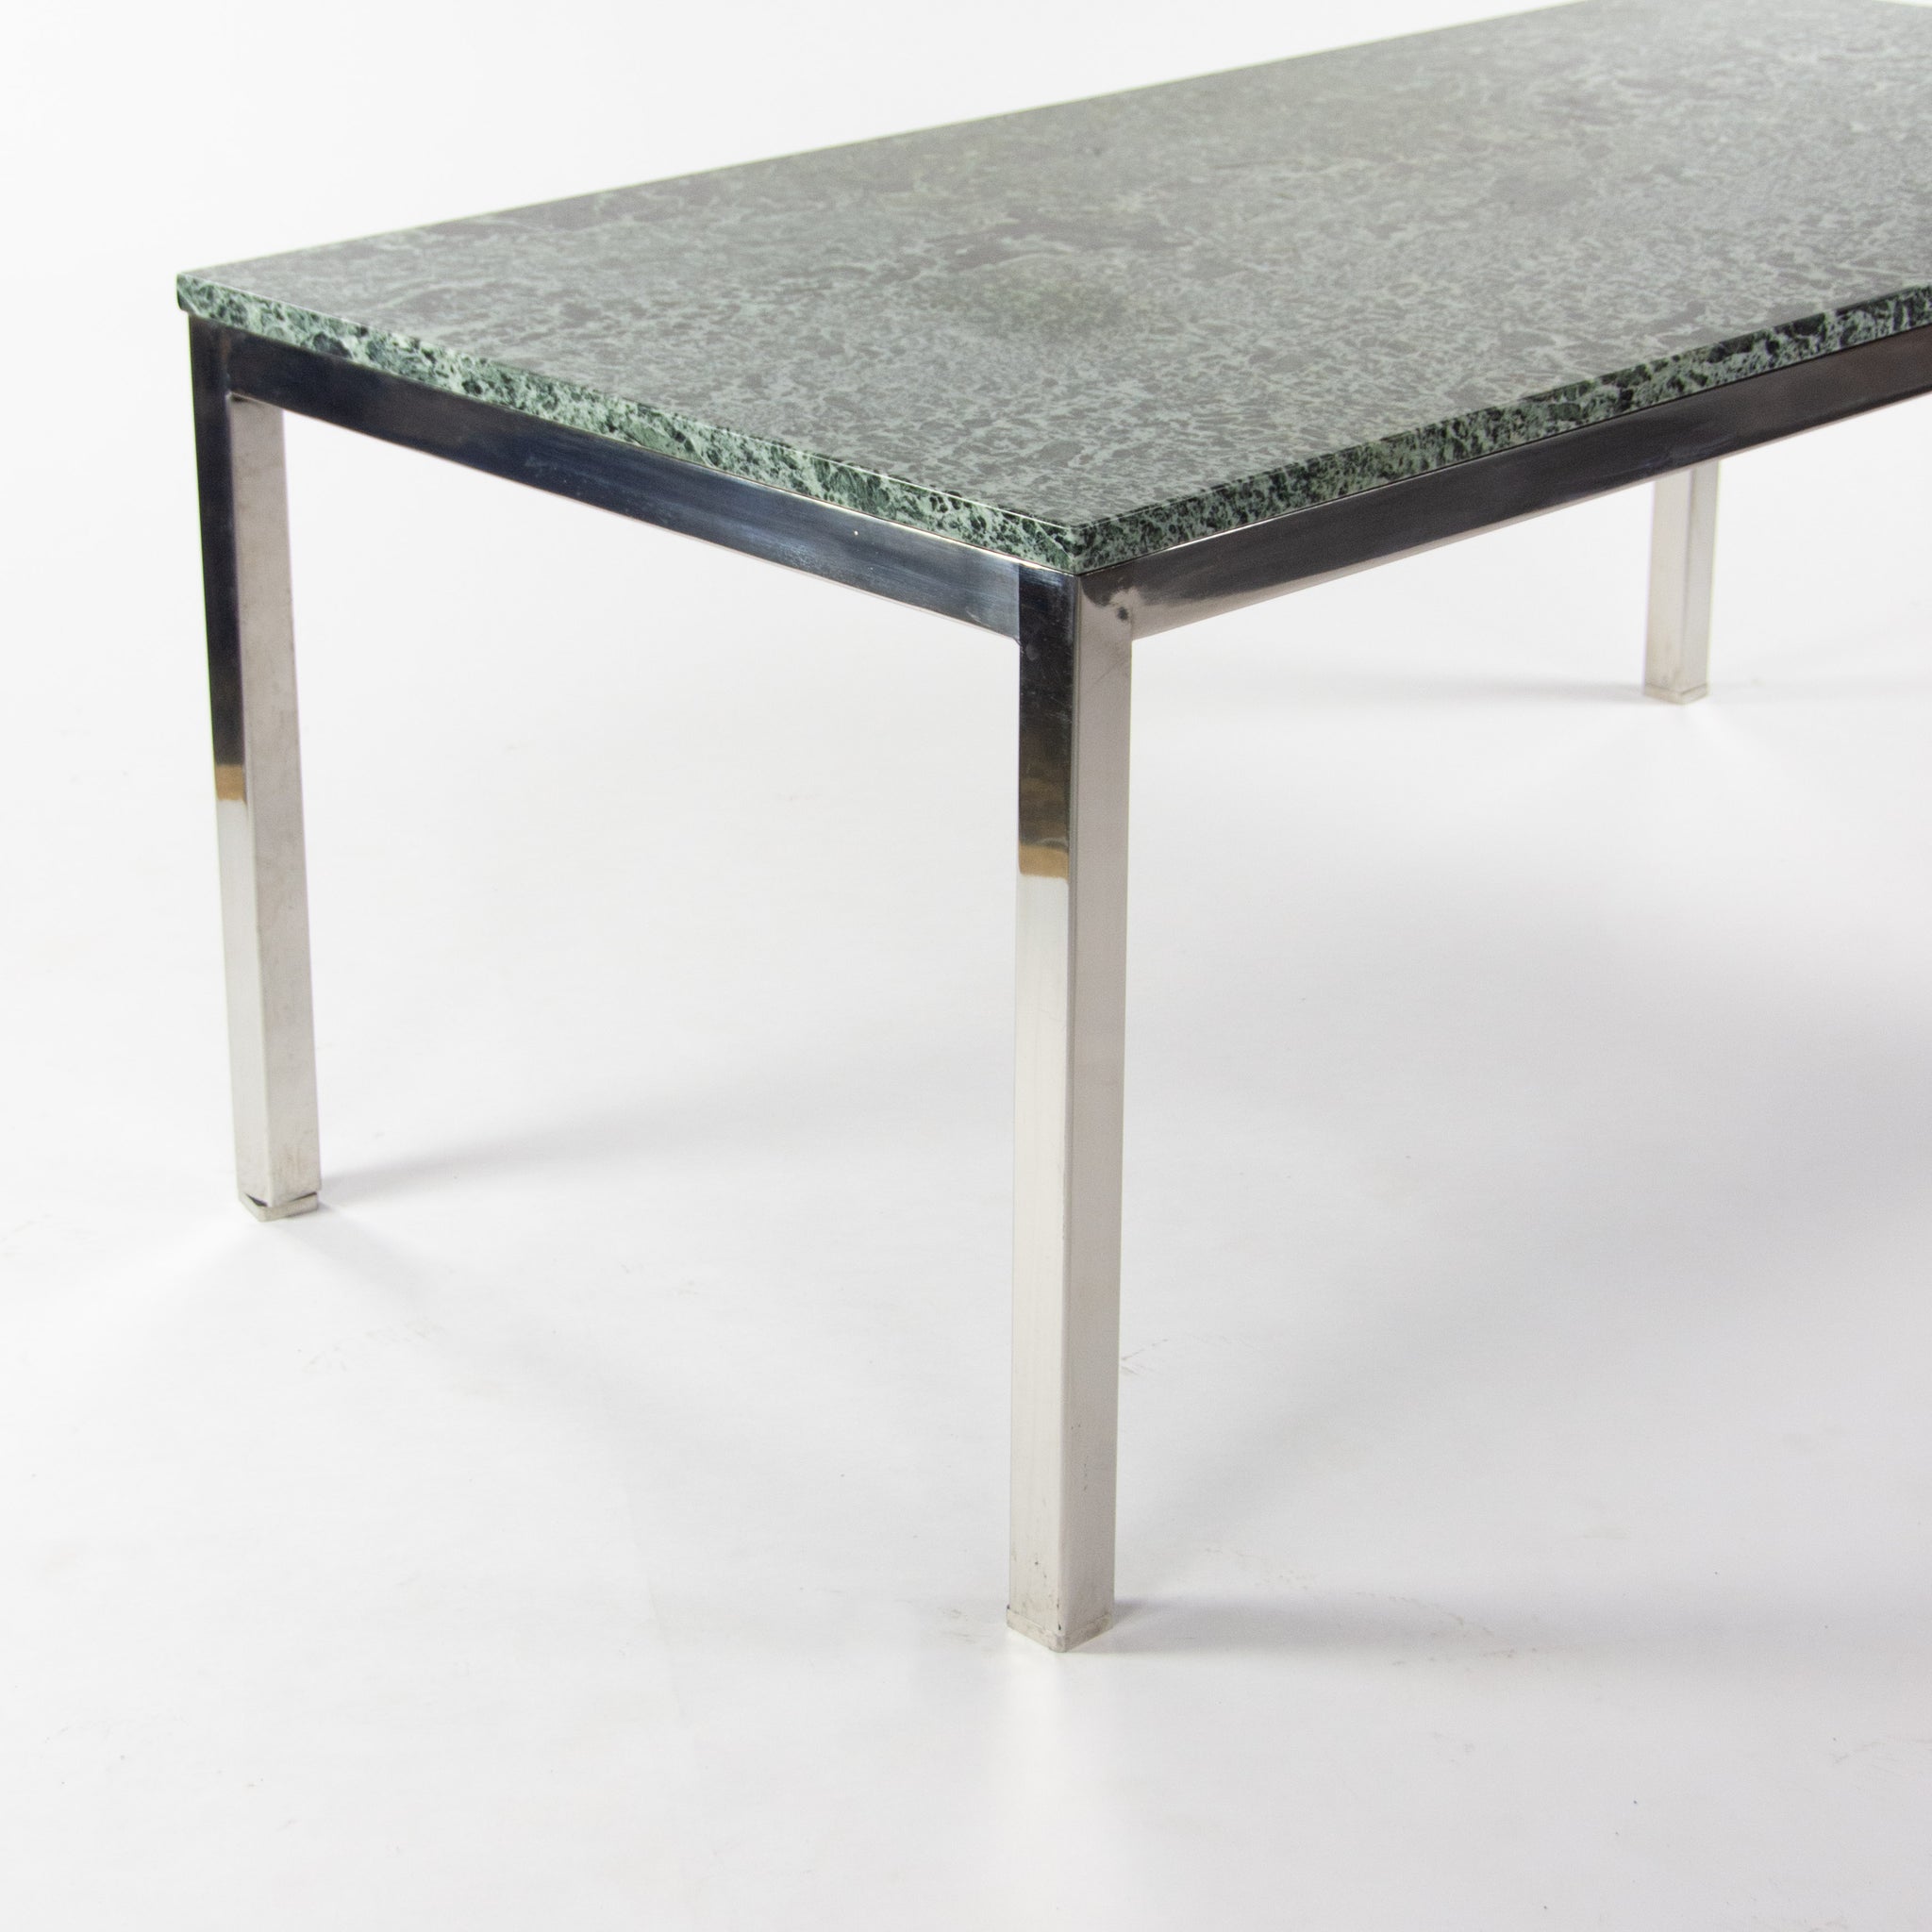 Green Granite Cumberland Meeting Dining Conference Tables Stainless Steel Base